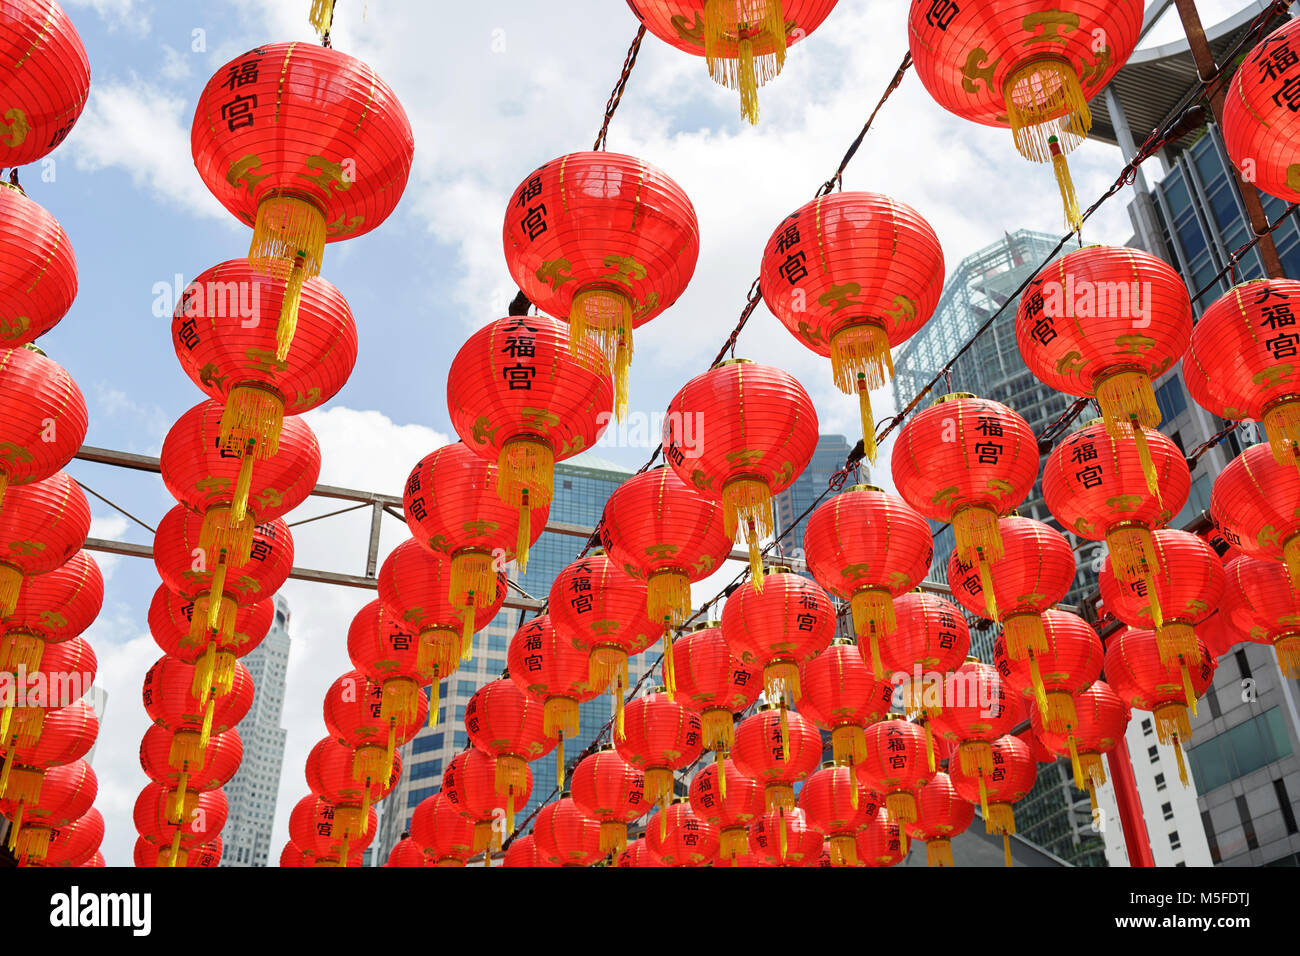 Traditional red lanterns during Chinese New Year in Chinatown